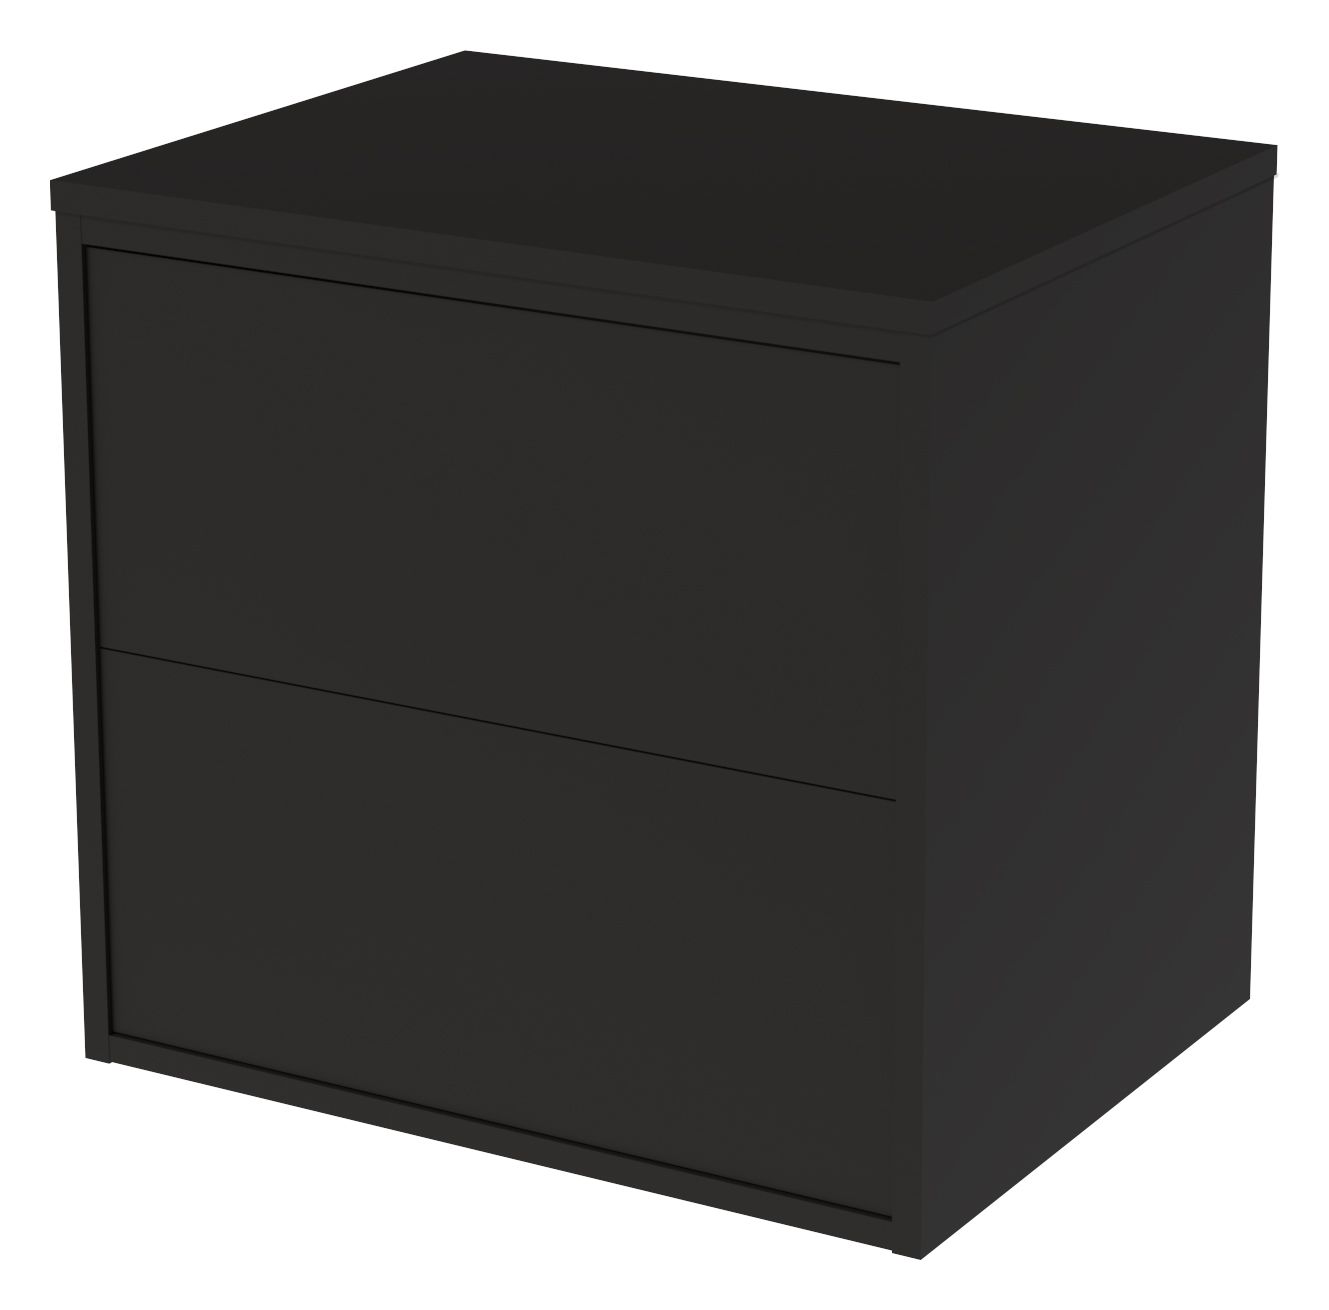 Image of Wickes Tallinn Graphite Push to Open Wall Hung Vanity Unit - 600 x 550mm